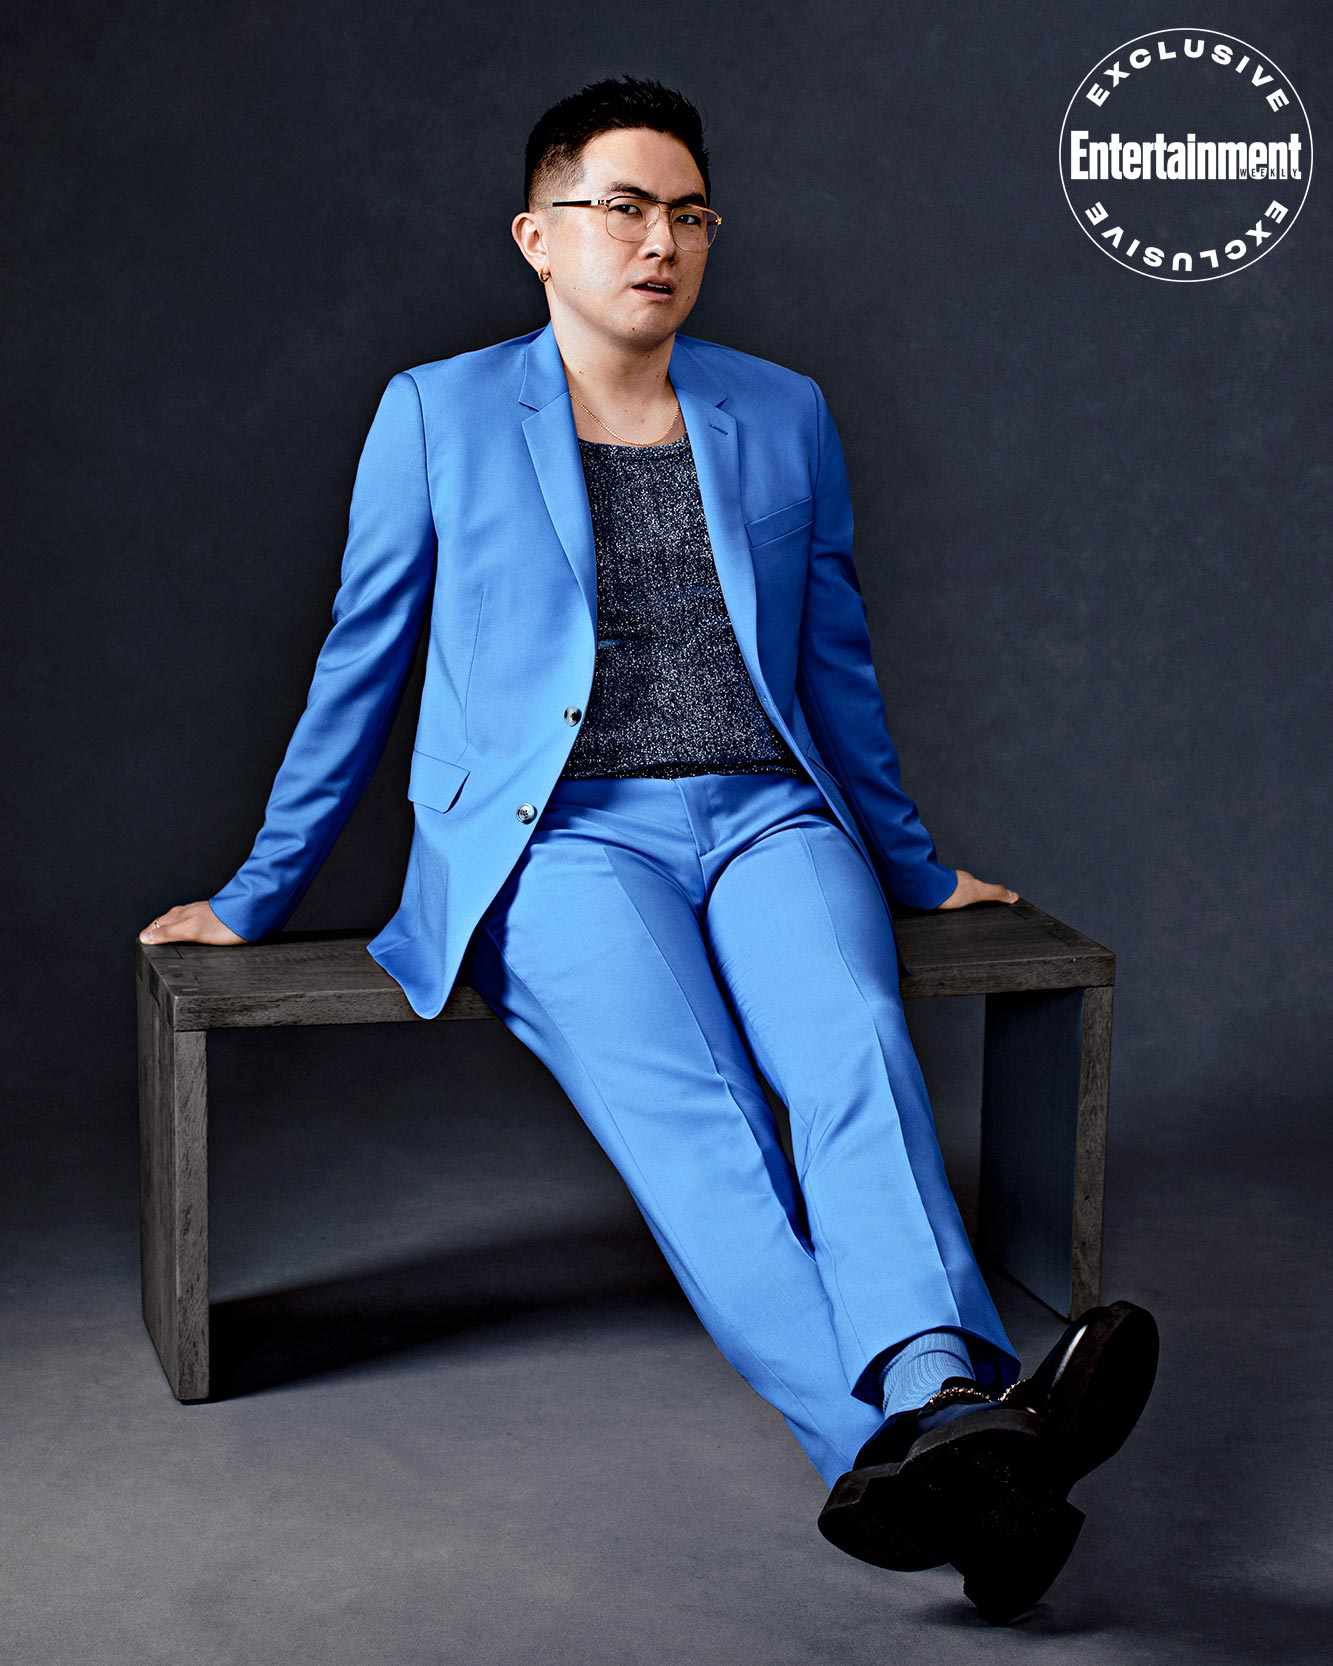 SNL's Bowen Yang is defining funny for a new generation | EW.com